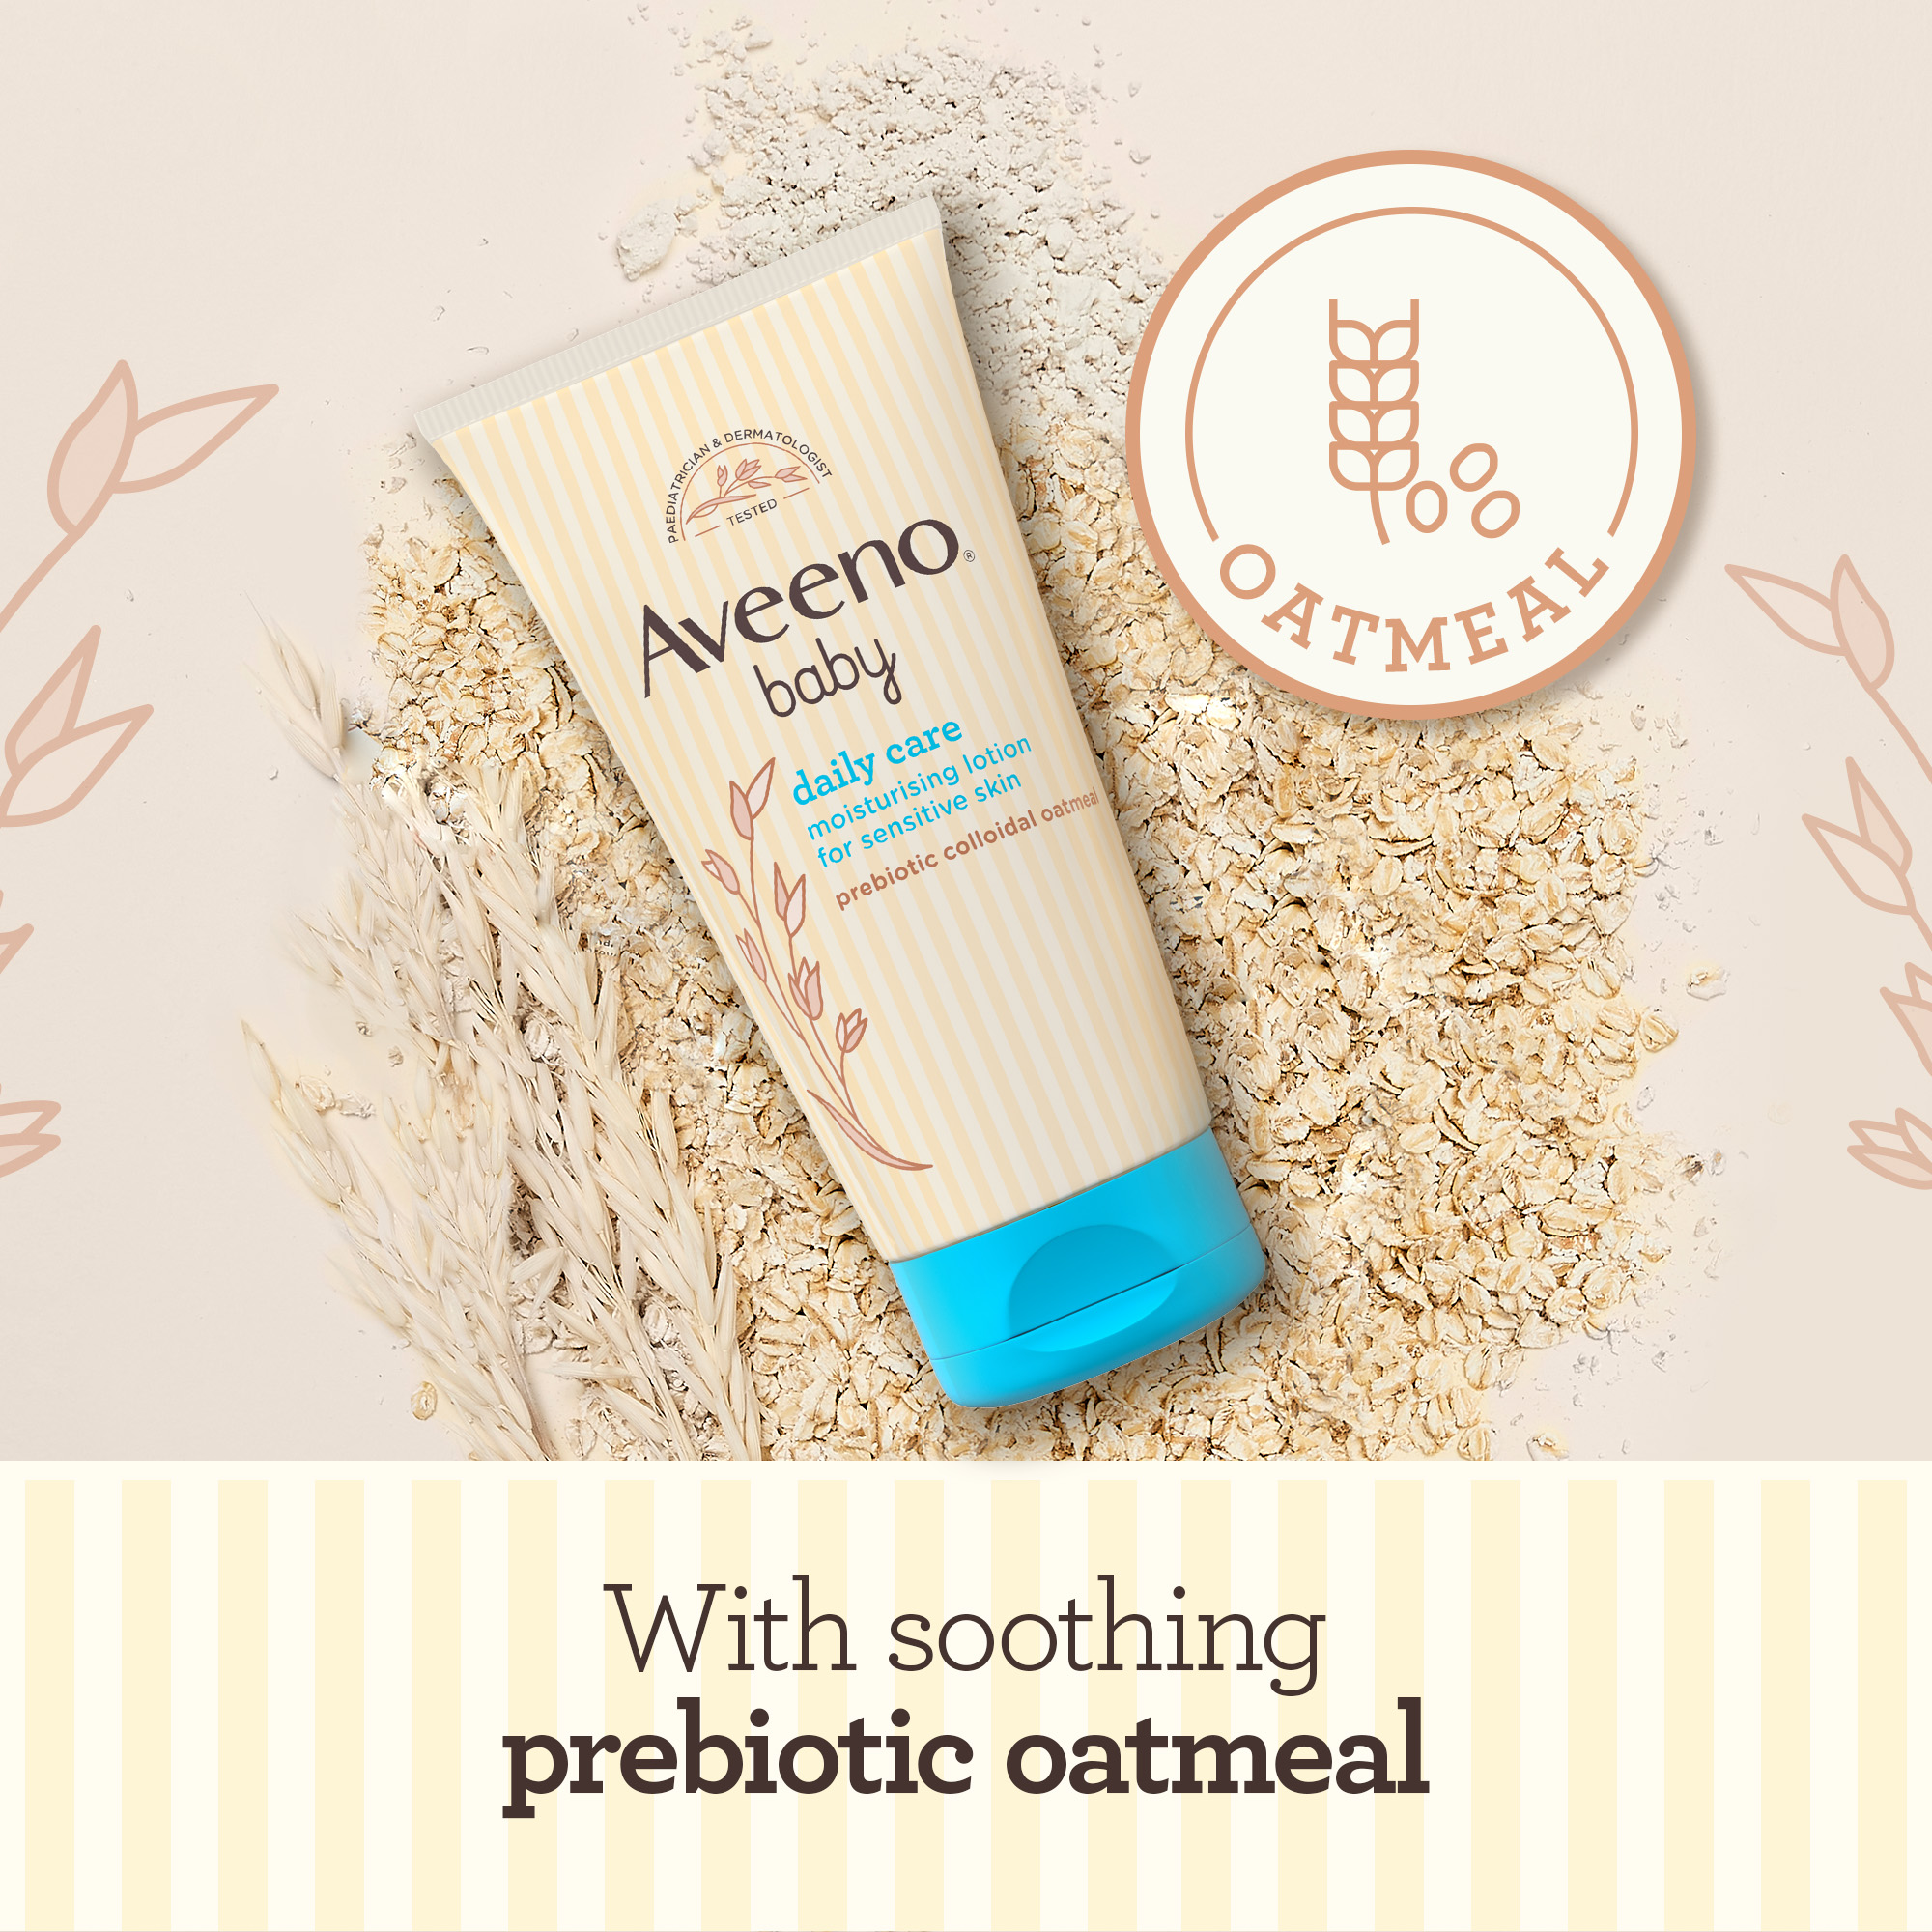 AVEENO® BABY DAILY CARE MOISTURISING LOTION WITH SOOTHING PREBIOTIC OATMEAL